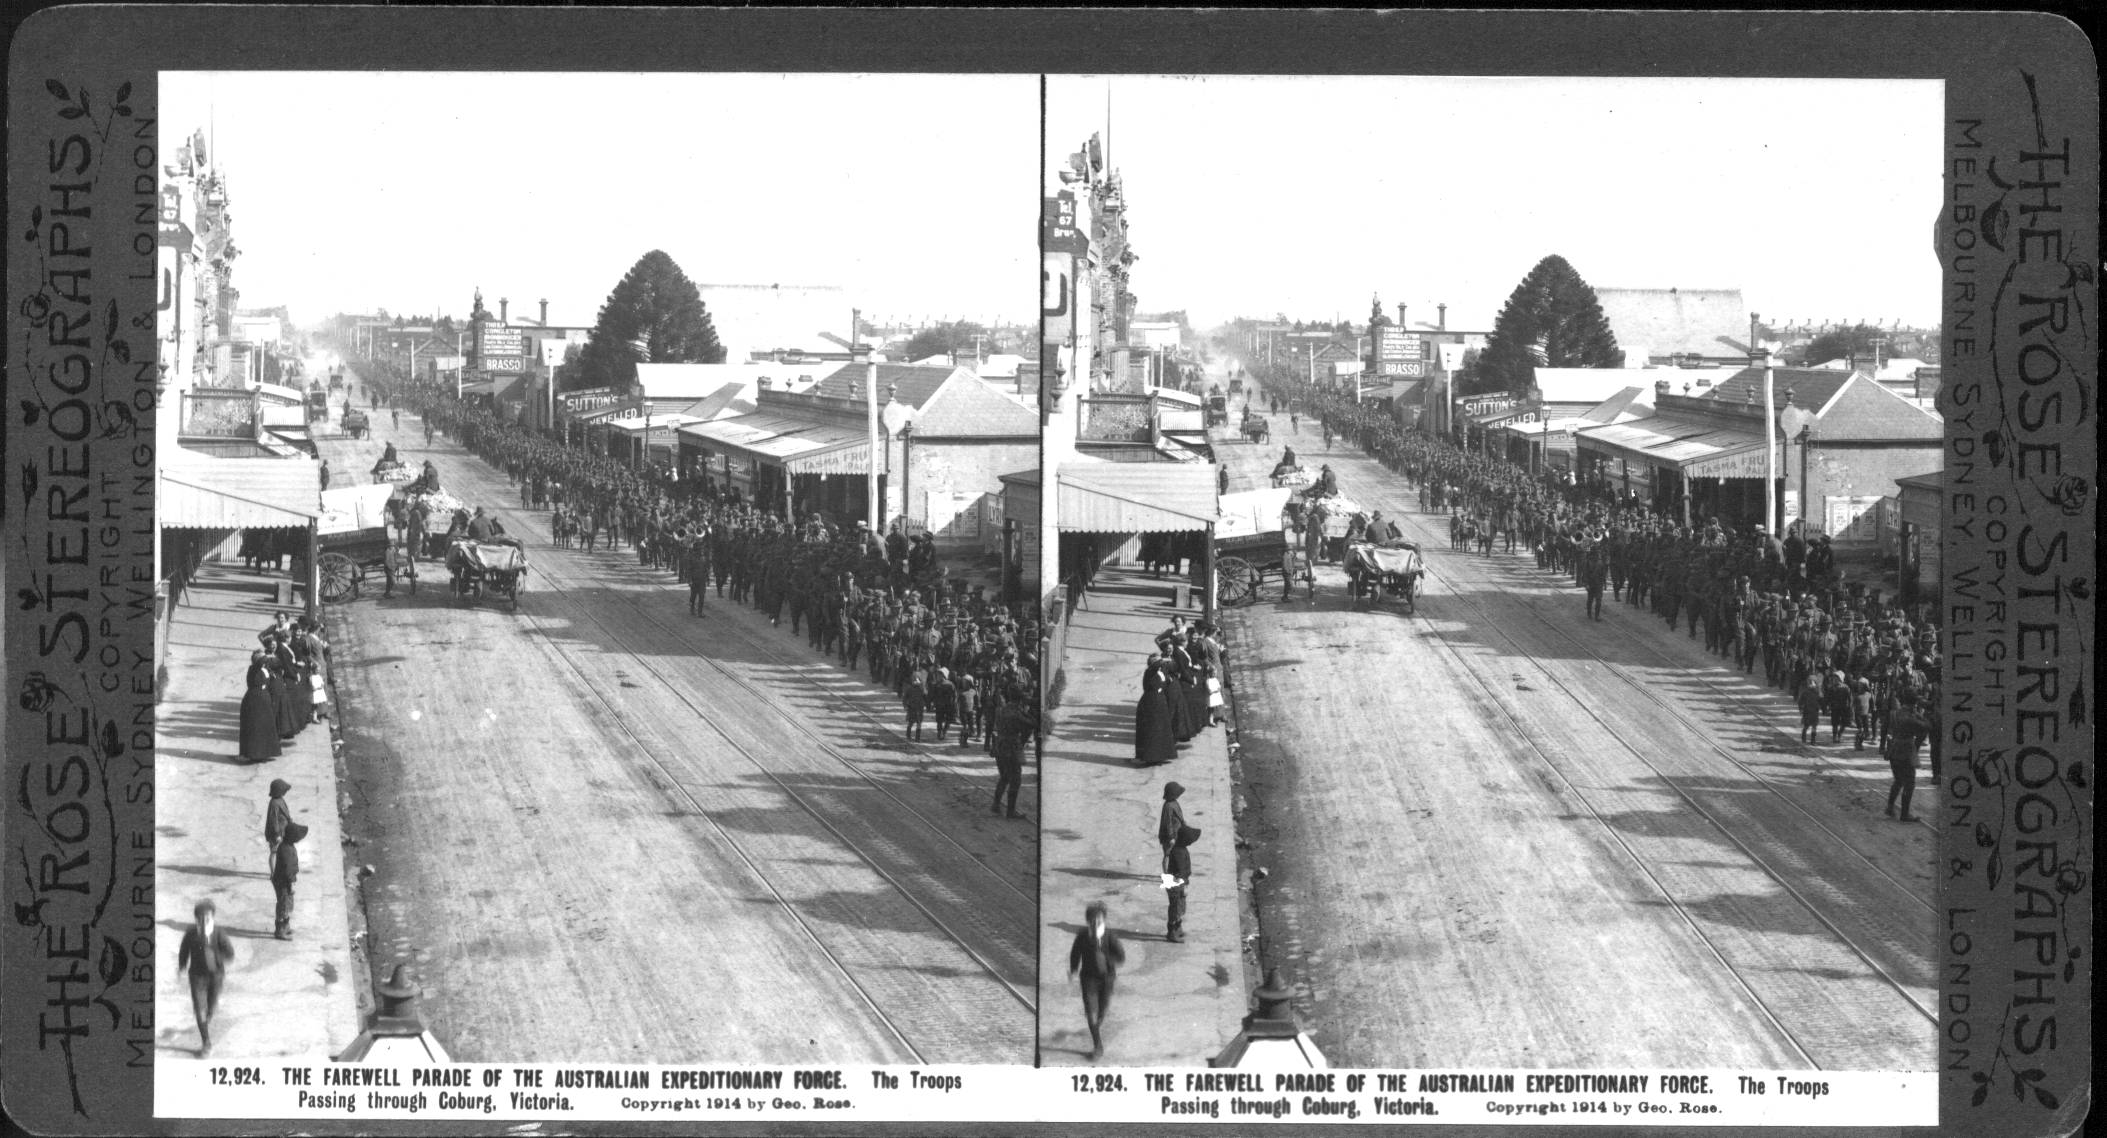 THE FAREWELL PARADE OF THE AUSTRALIAN EXPEDITIONARY FORCE. The Troops Passing through Coburg, Victoria.